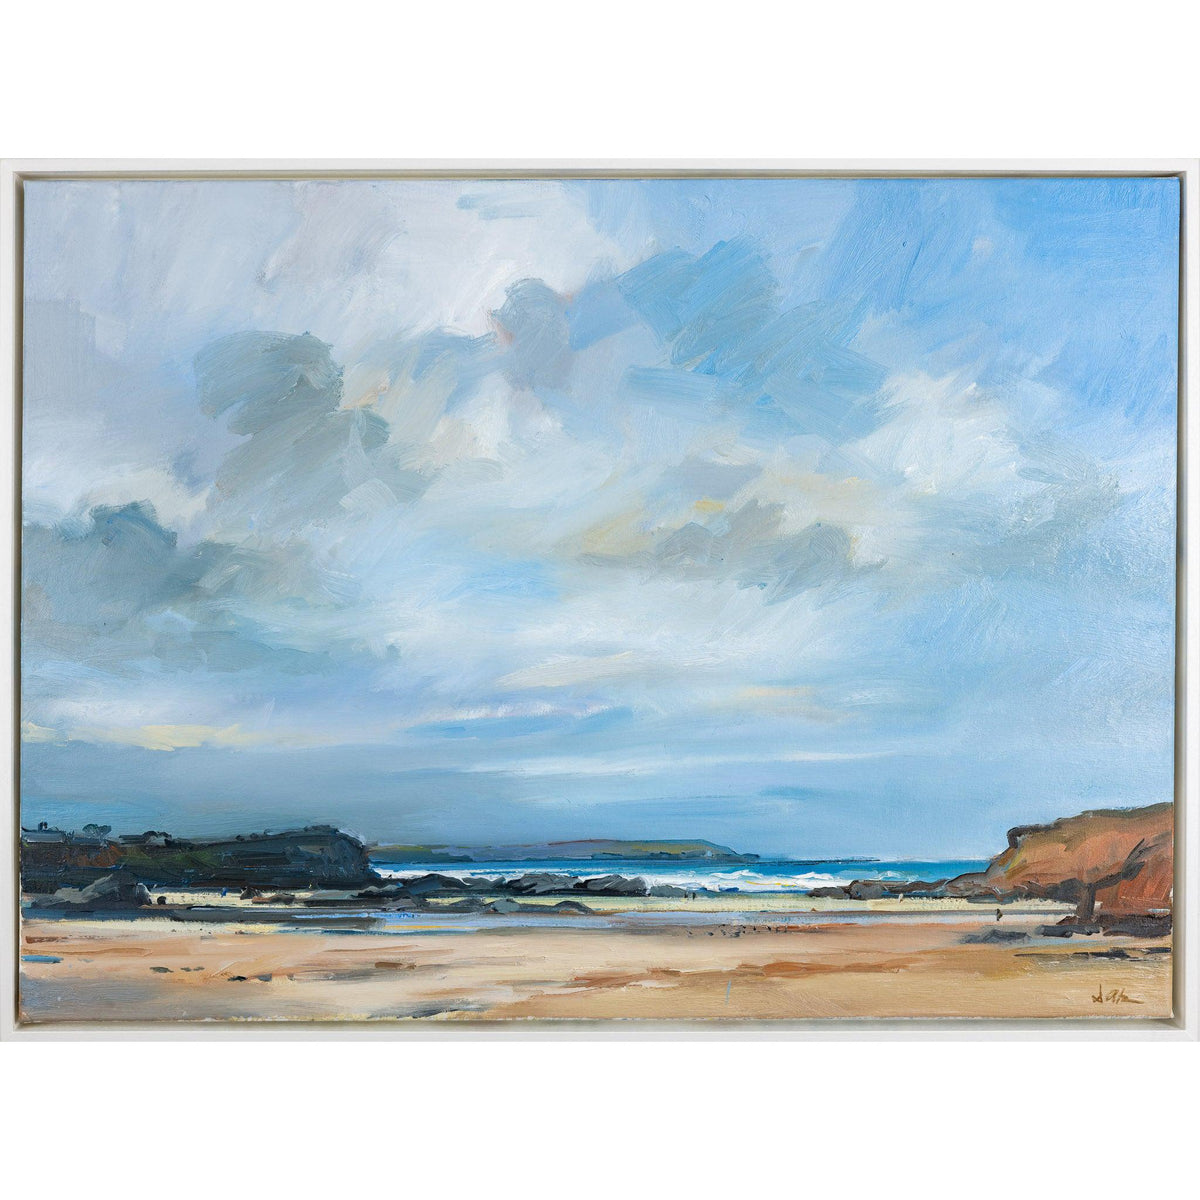 &#39;The Sea And Sky, Trevone Beach&#39; oil on canvas original by David Atkins, available at Padstow Gallery, Cornwall